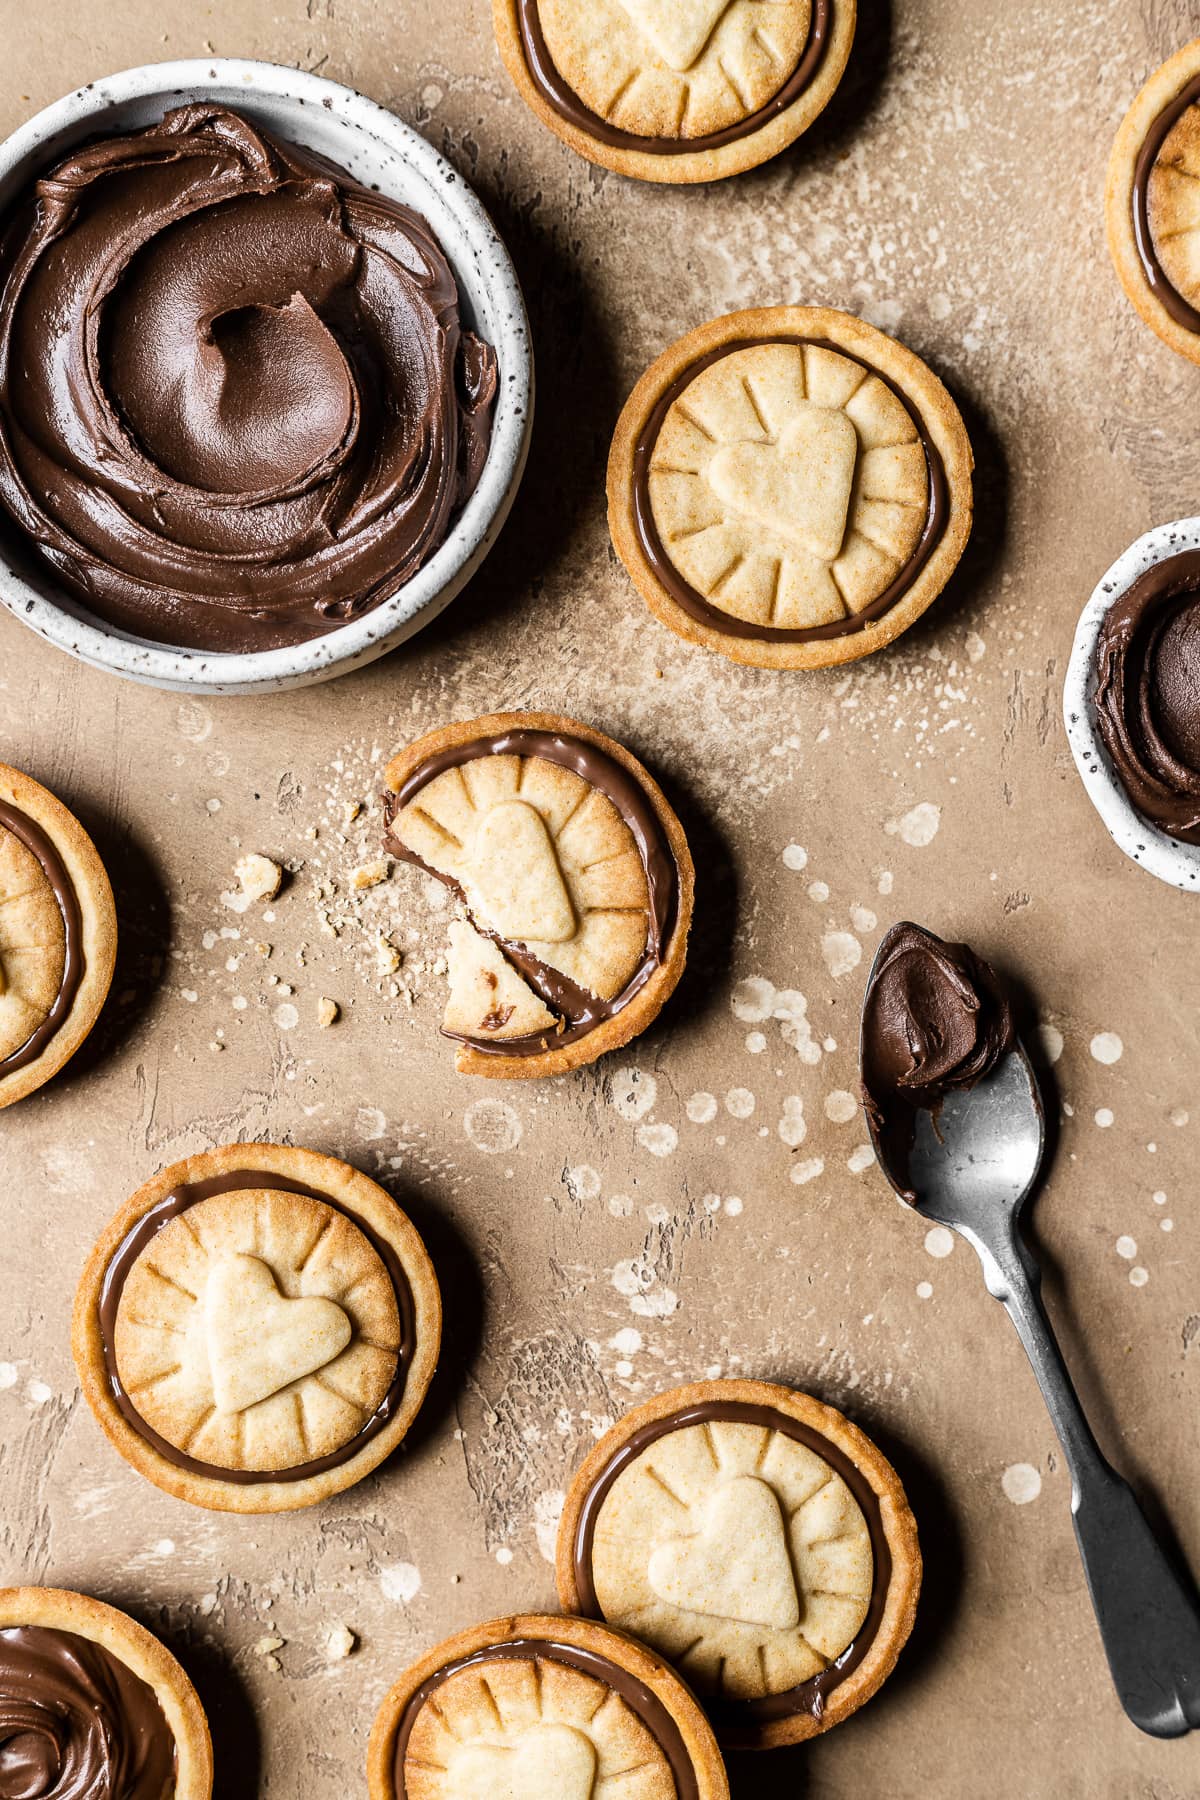 Nutella stuffed cookies on a warm tan speckled stone surface. A small white ceramic bowl is filled with a swirl of Nutella. An antique silver spoon with a scoop of Nutella rests on the surface at bottom right.